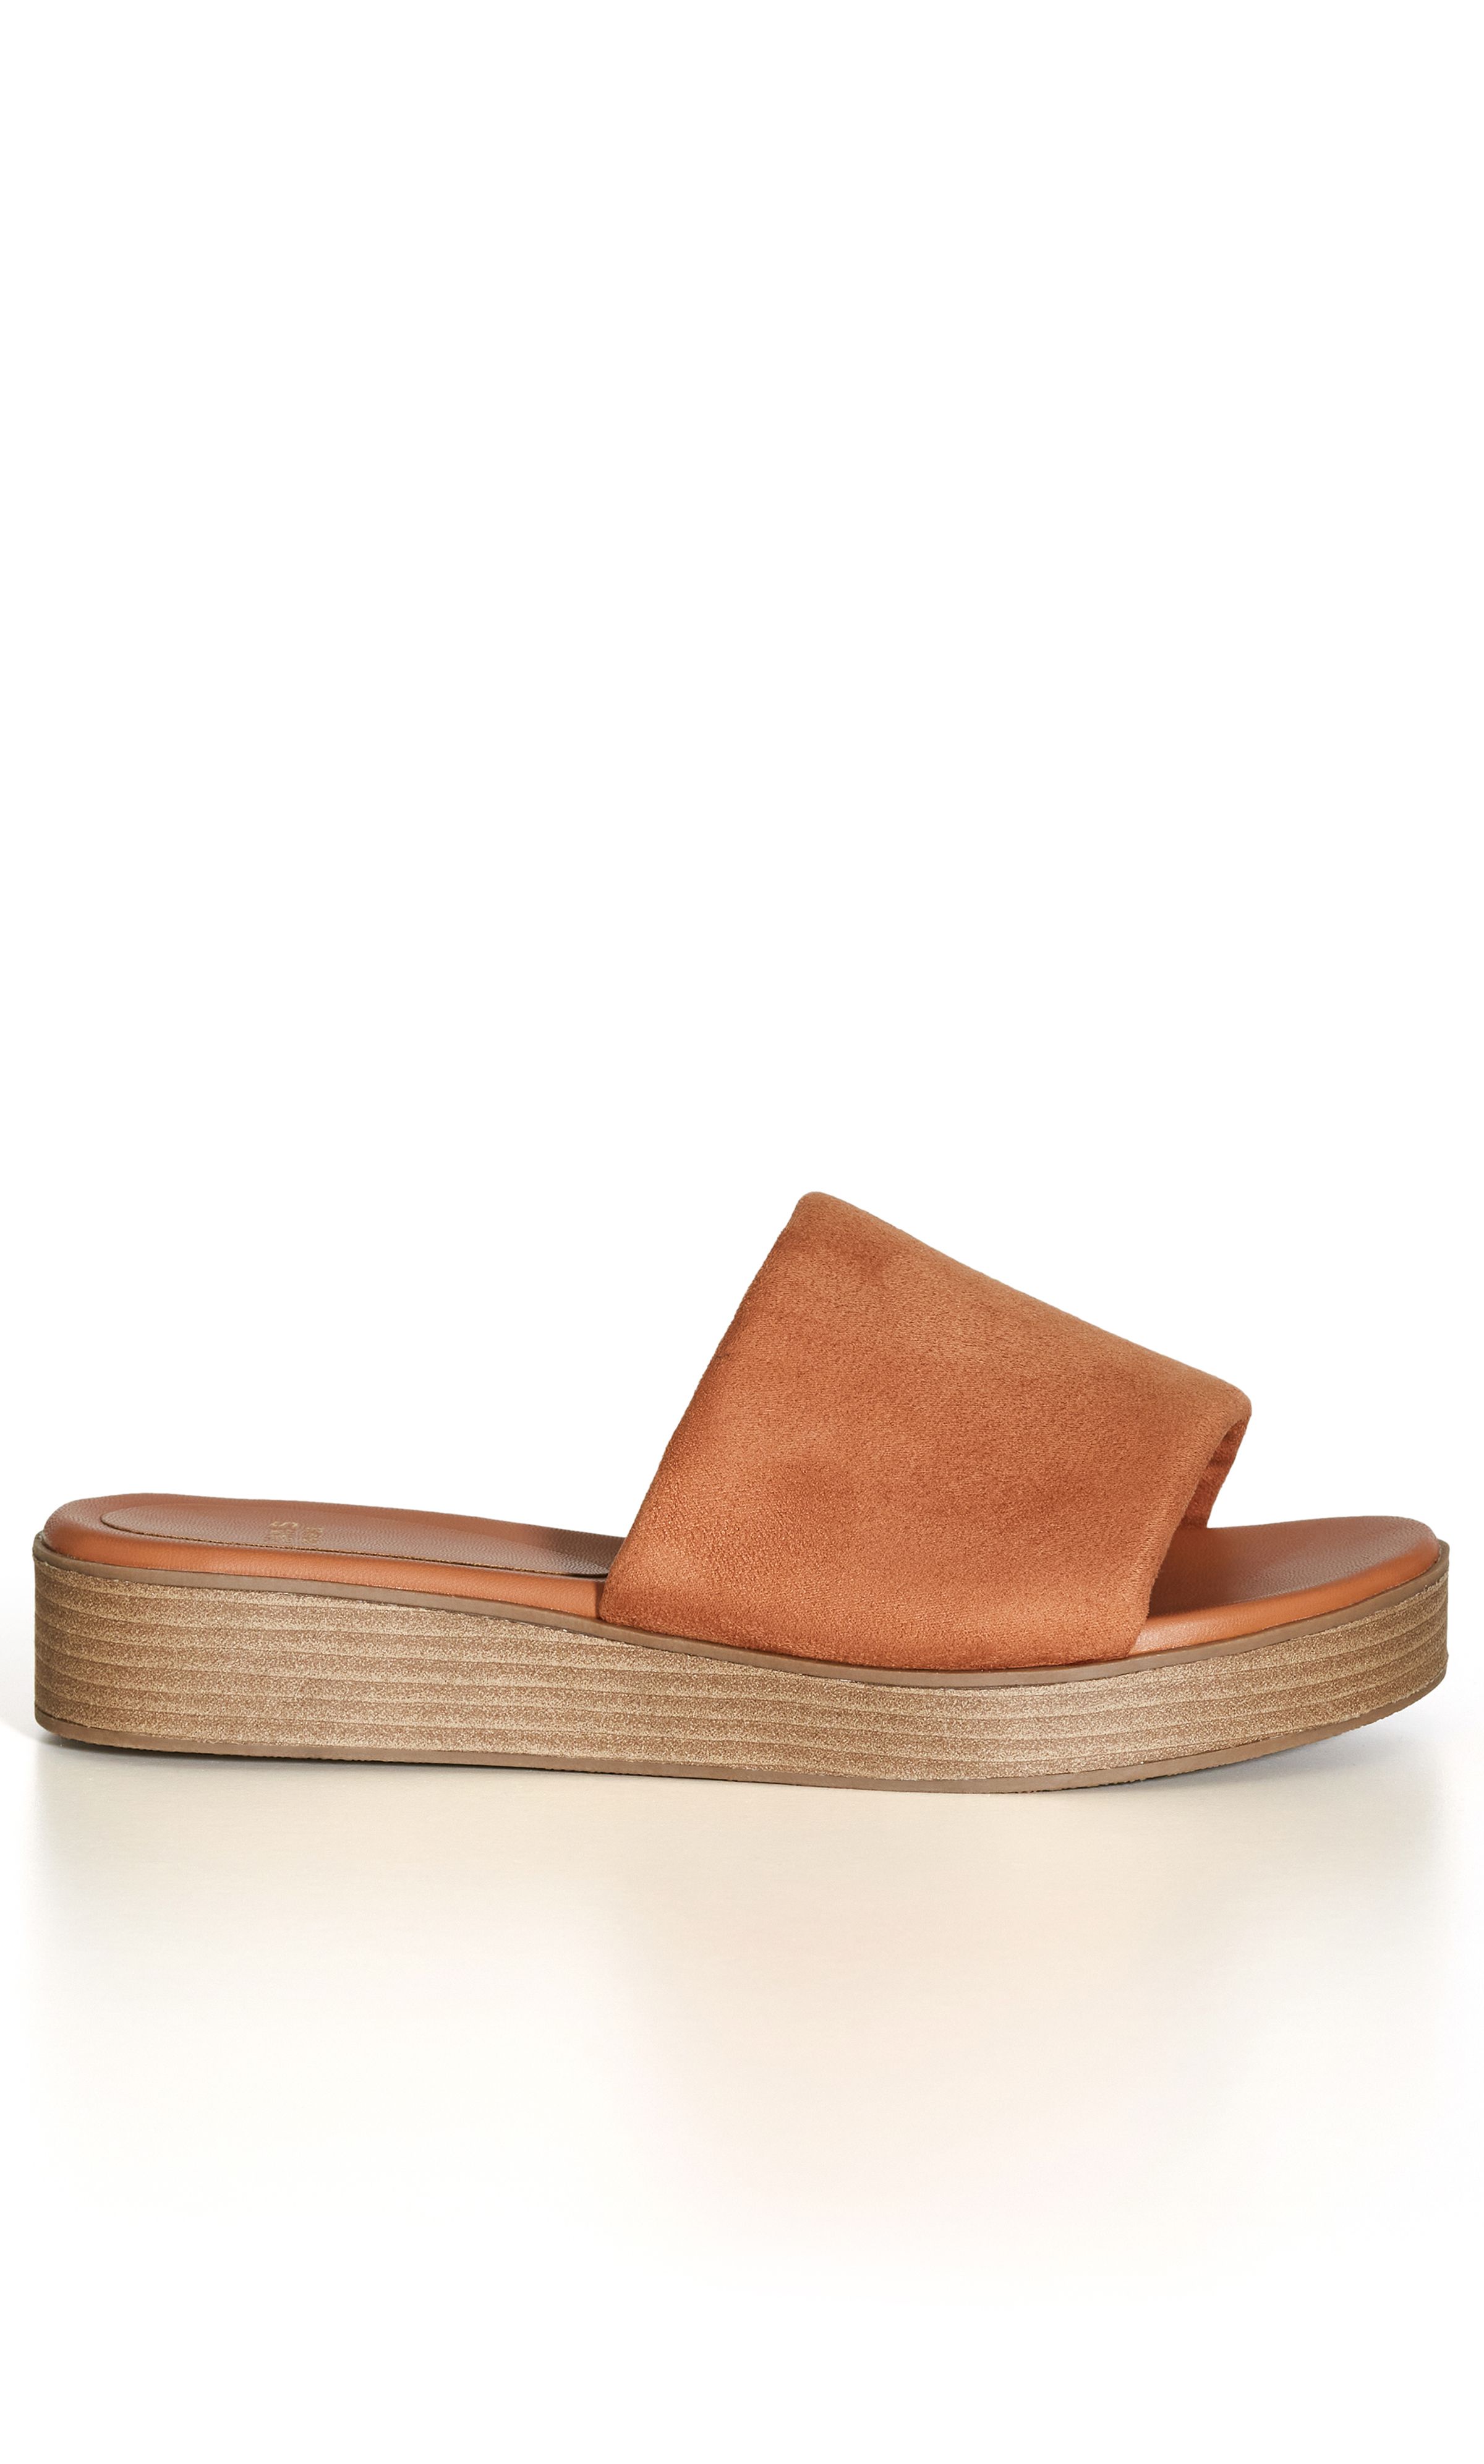 The Band Slide Wedge is summer's favourite shoe, offering an easy slip on style and stylish wood-stacked platform heel. Whether you're headed to the shops or having brunch with the girls, this chic pair has you covered! Key Features Include: - Round toe - Single thick band - Slip on style - Chunky wood-stacked platform sole - Low wedge heel Elevate your Saturday style with a V-neck top, pleated midi skirt and statement earrings.